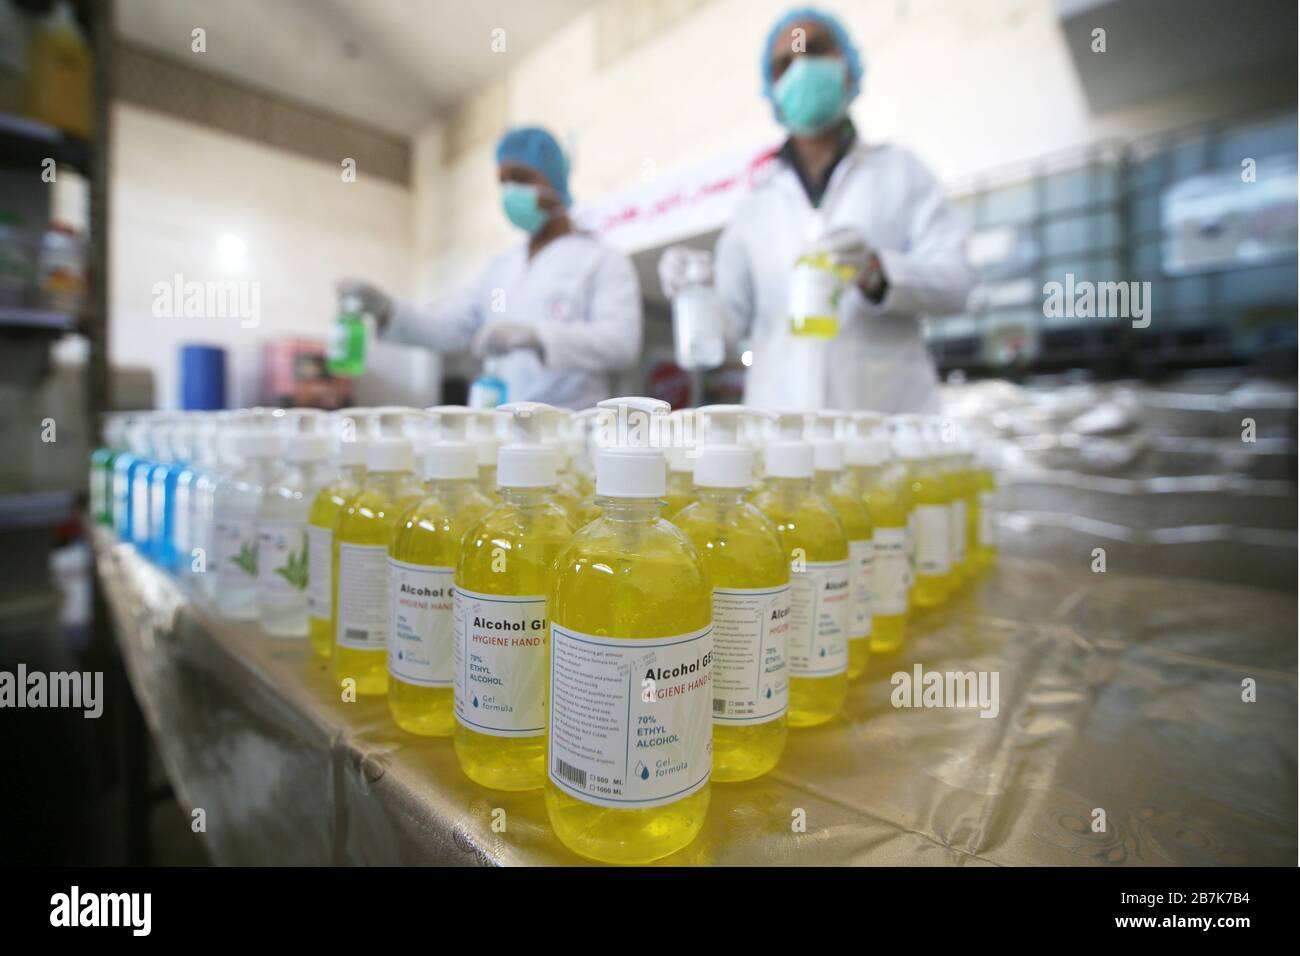 Gaza. 16th Mar, 2020. Palestinian workers work on the production line of sterilizing gel at a cleaning materials factory in the southern Gaza Strip city of Rafah, March 16, 2020. Gaza authorities declared a new set of precautionary measures amid concerns about the spread of the novel coronavirus in the coastal enclave. Credit: Khaled Omar/Xinhua/Alamy Live News Stock Photo